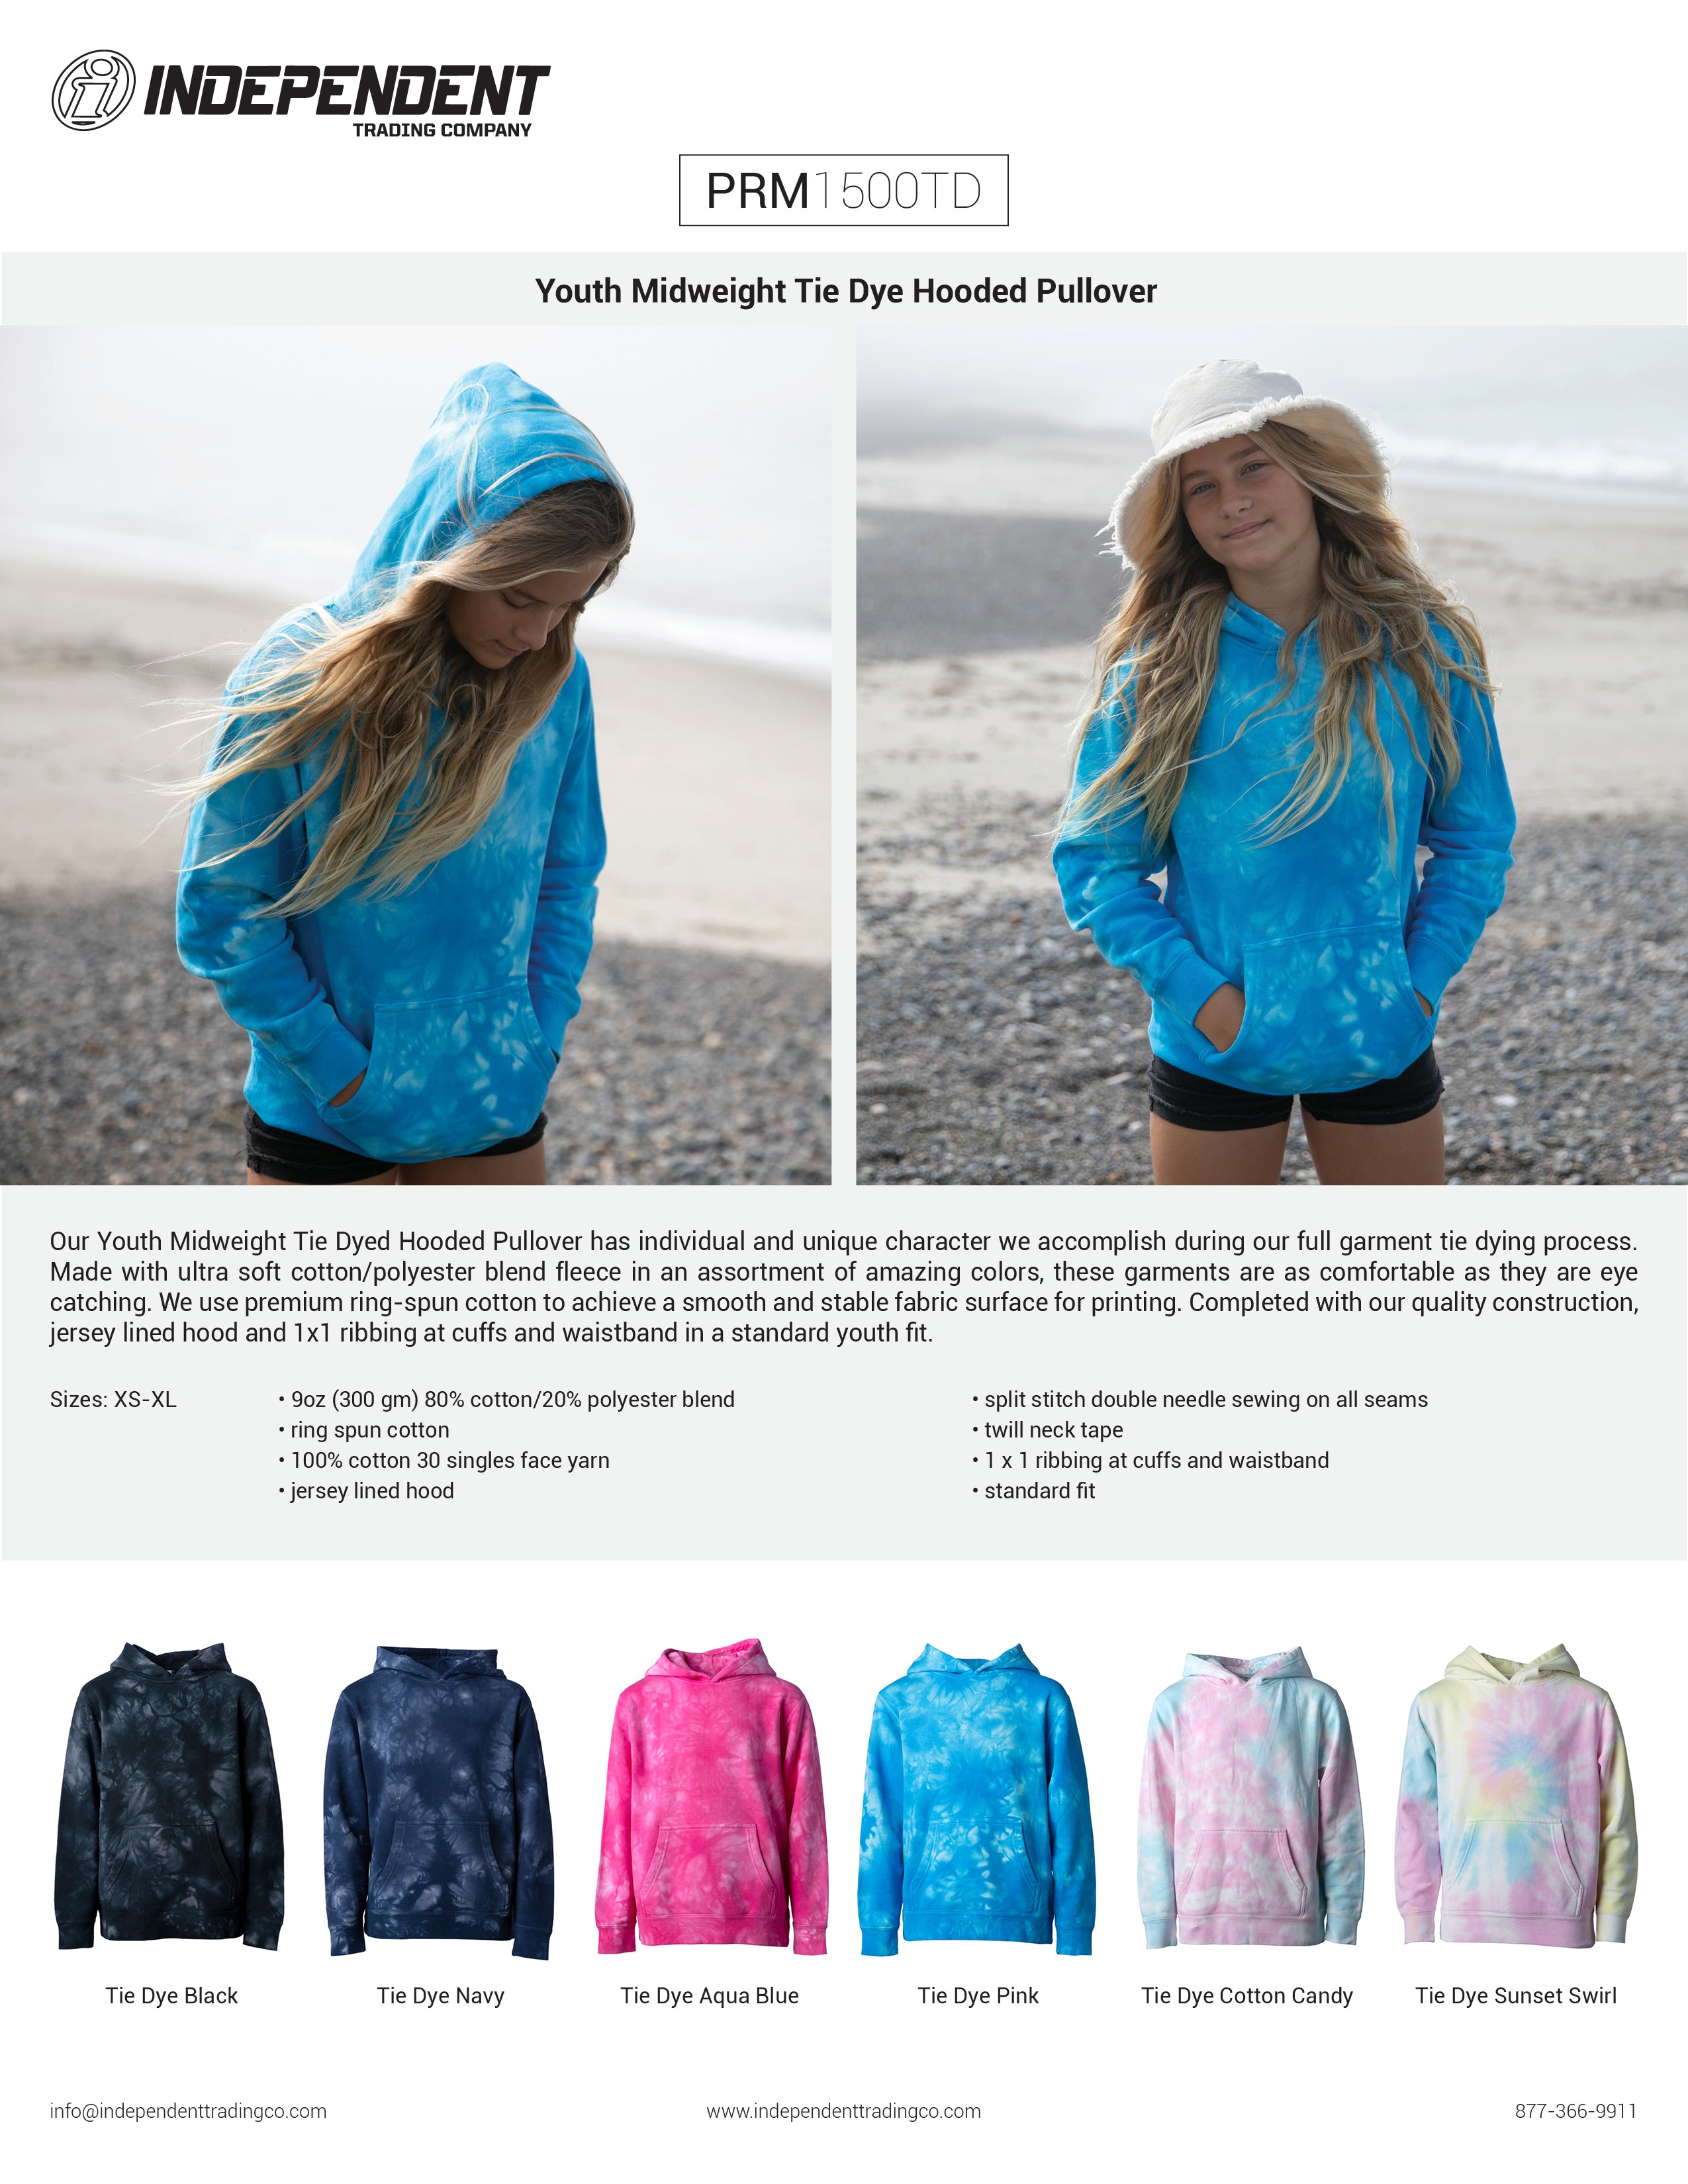 PRM1500TD Youth Midweight Tie Dye Hooded Pullover